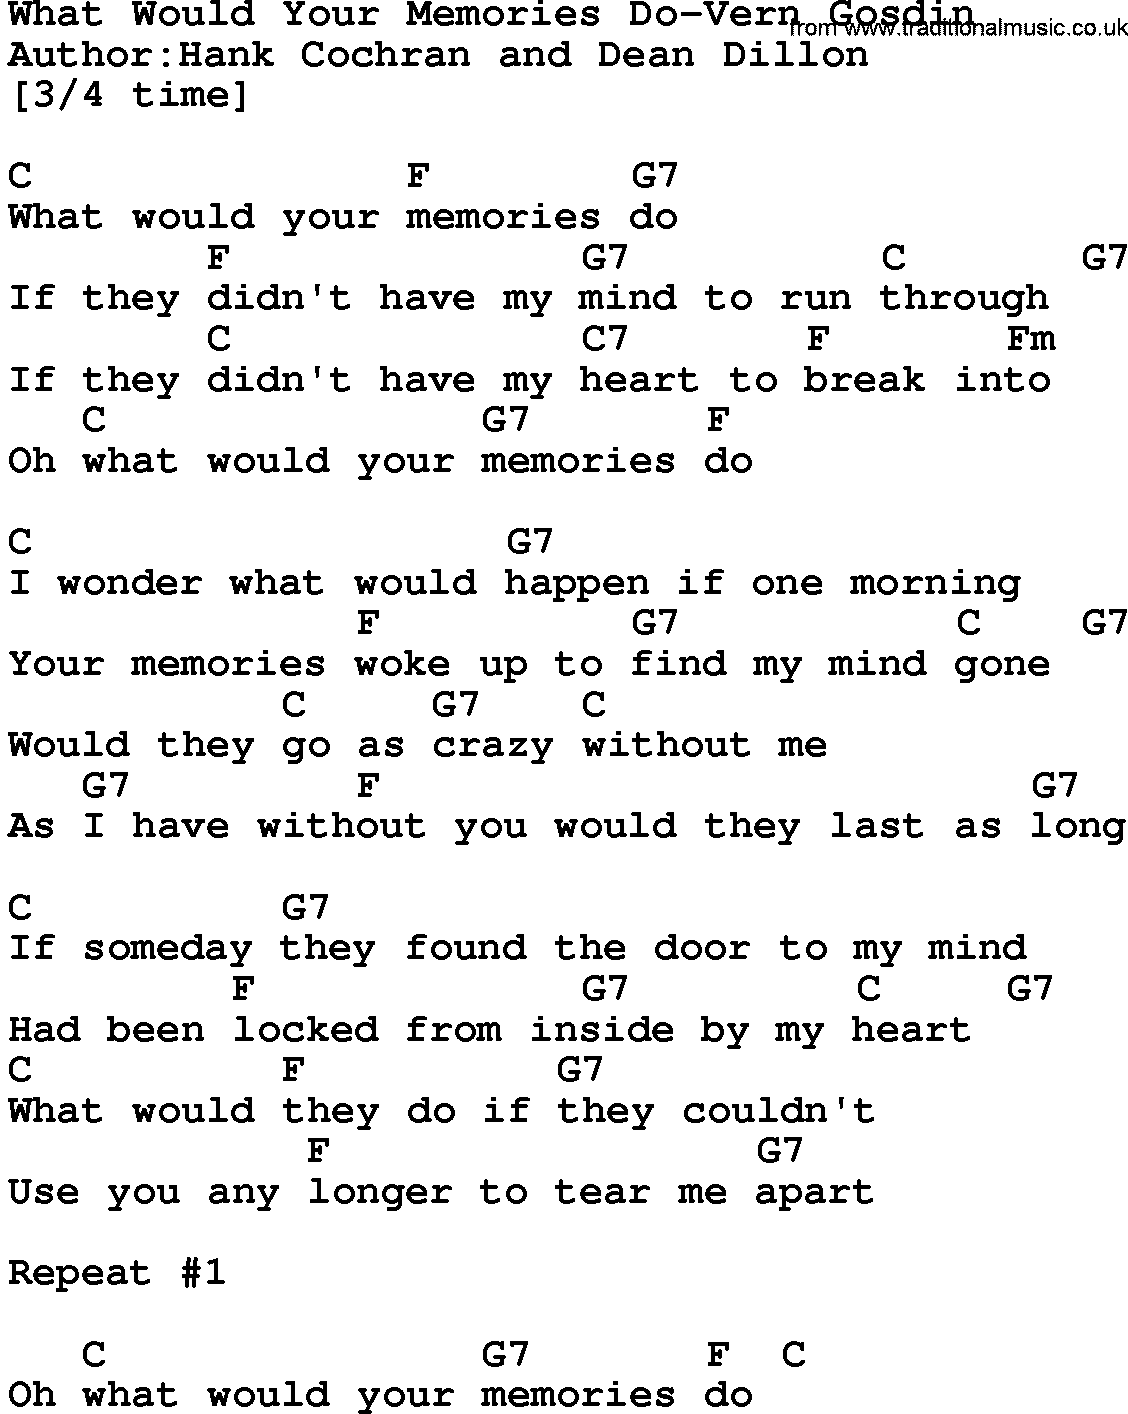 Country music song: What Would Your Memories Do-Vern Gosdin lyrics and chords